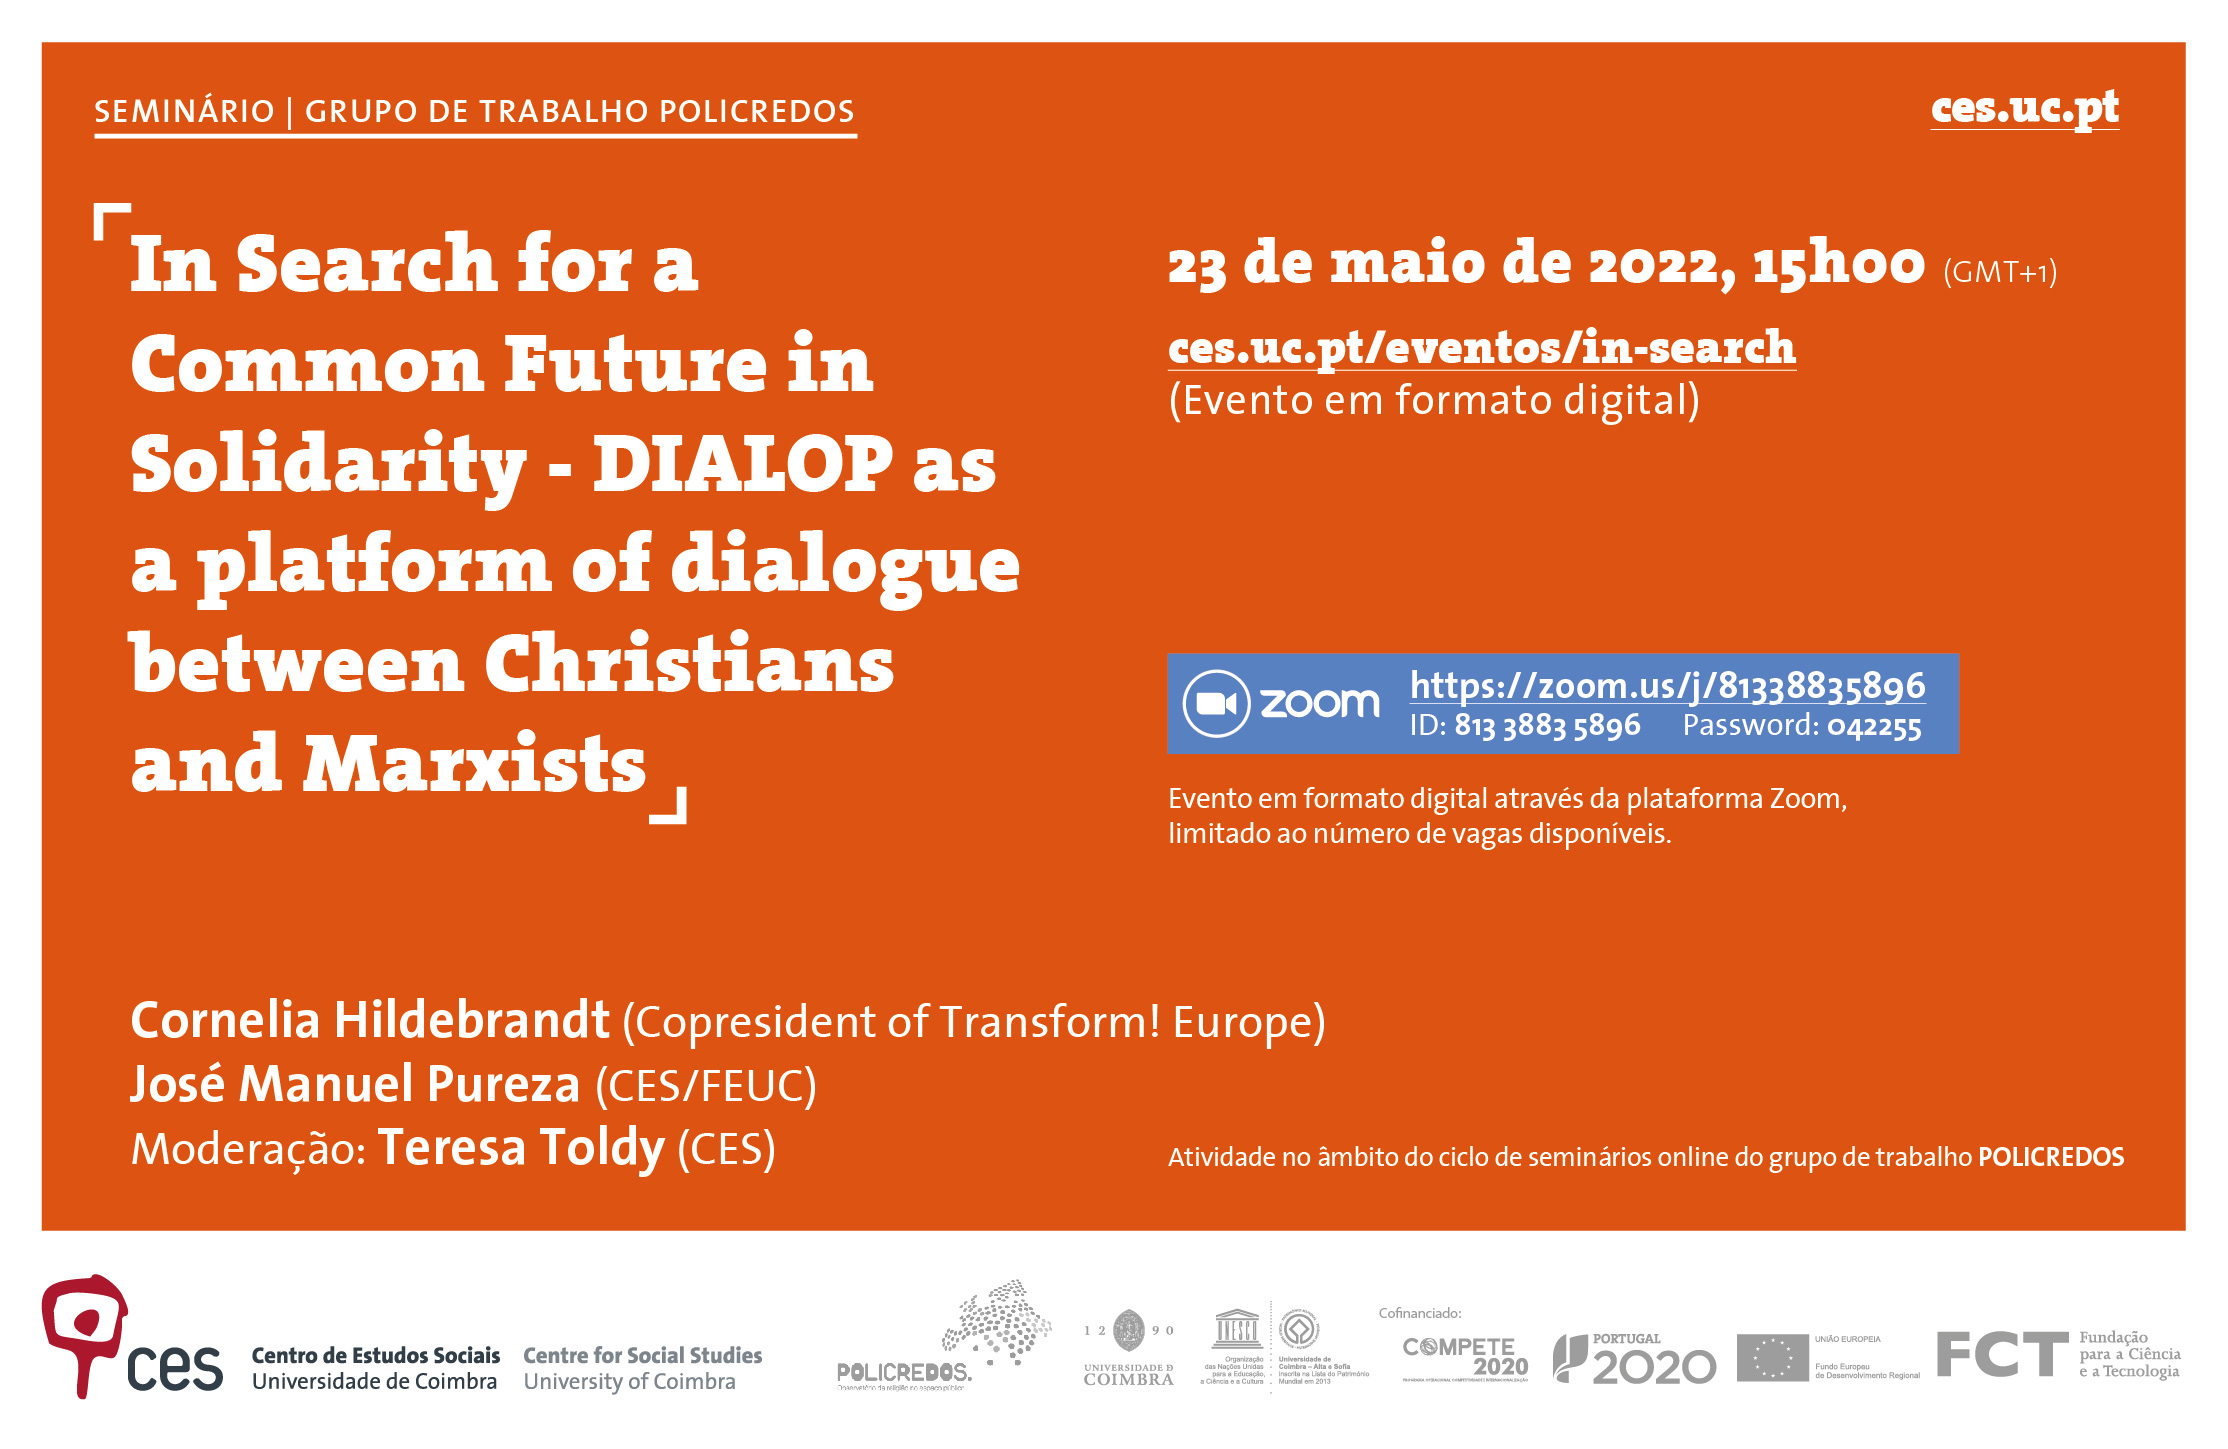 In Search for a Common Future in Solidarity - DIALOP as a platform of dialogue between Christians and Marxists<span id="edit_38277"><script>$(function() { $('#edit_38277').load( "/myces/user/editobj.php?tipo=evento&id=38277" ); });</script></span>